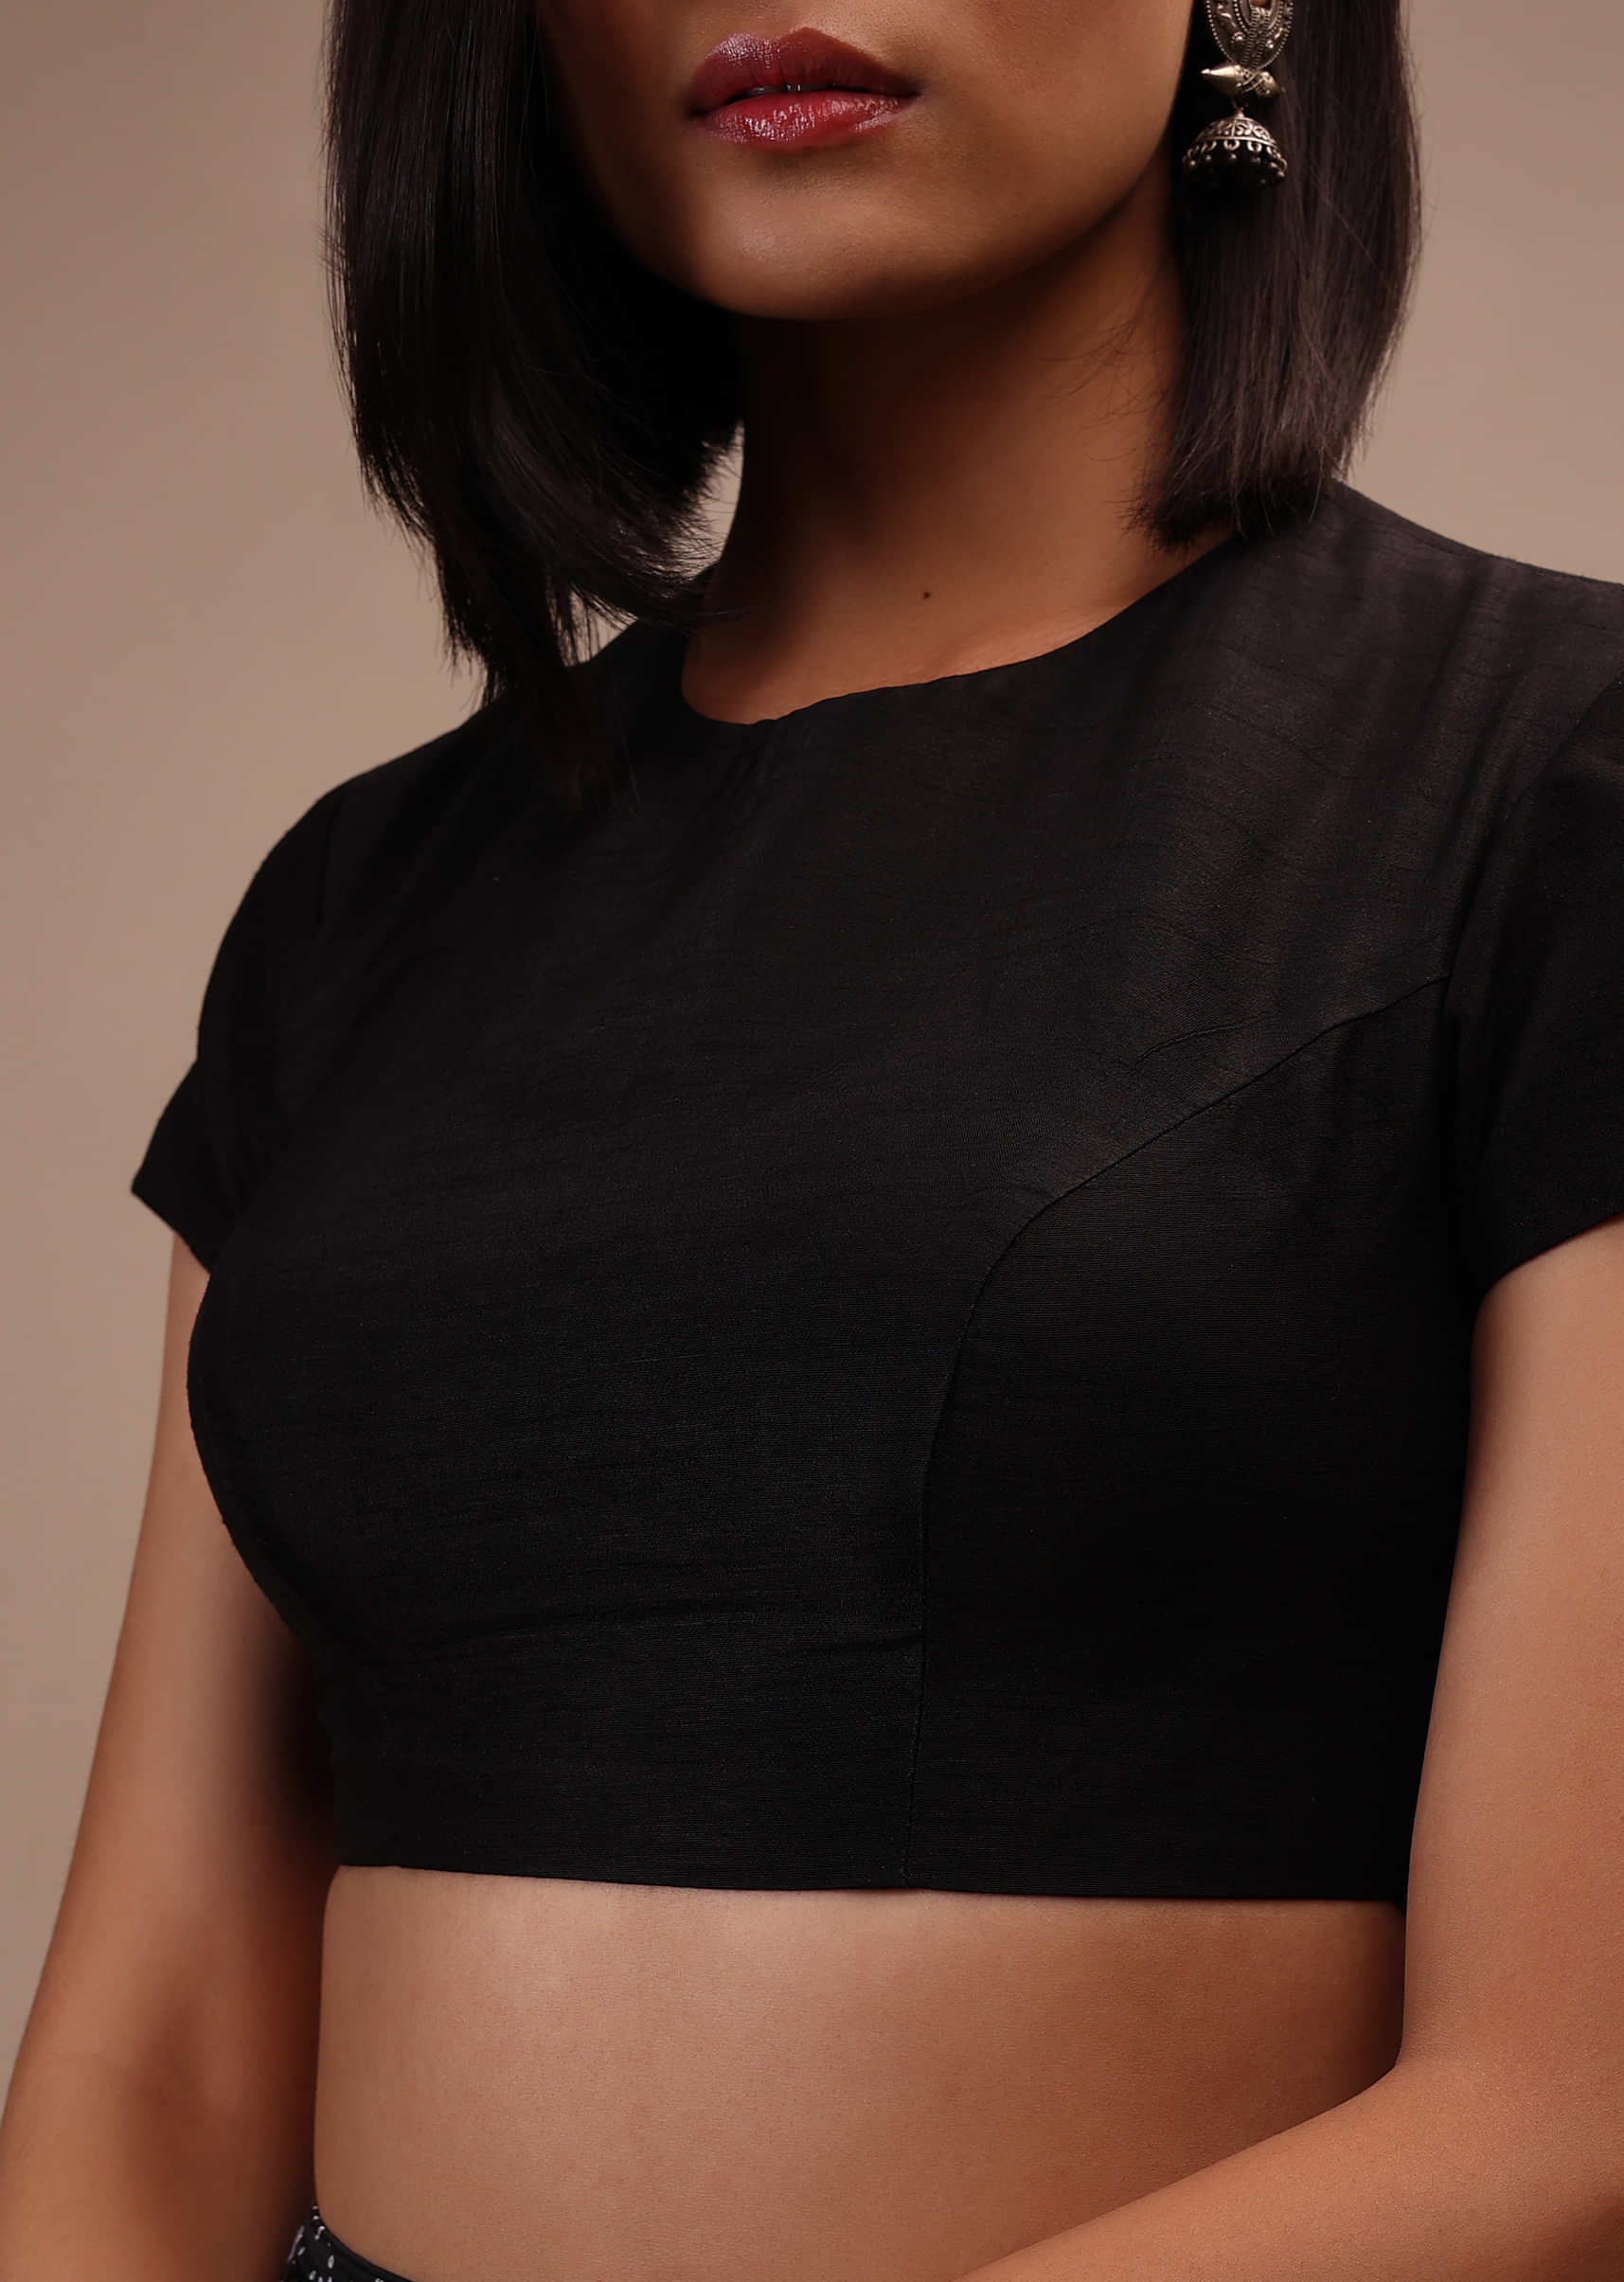 Black Cap Sleeves Blouse In The Round Neck. Raw Silk With Cut Out Back Neck And Hook Closure